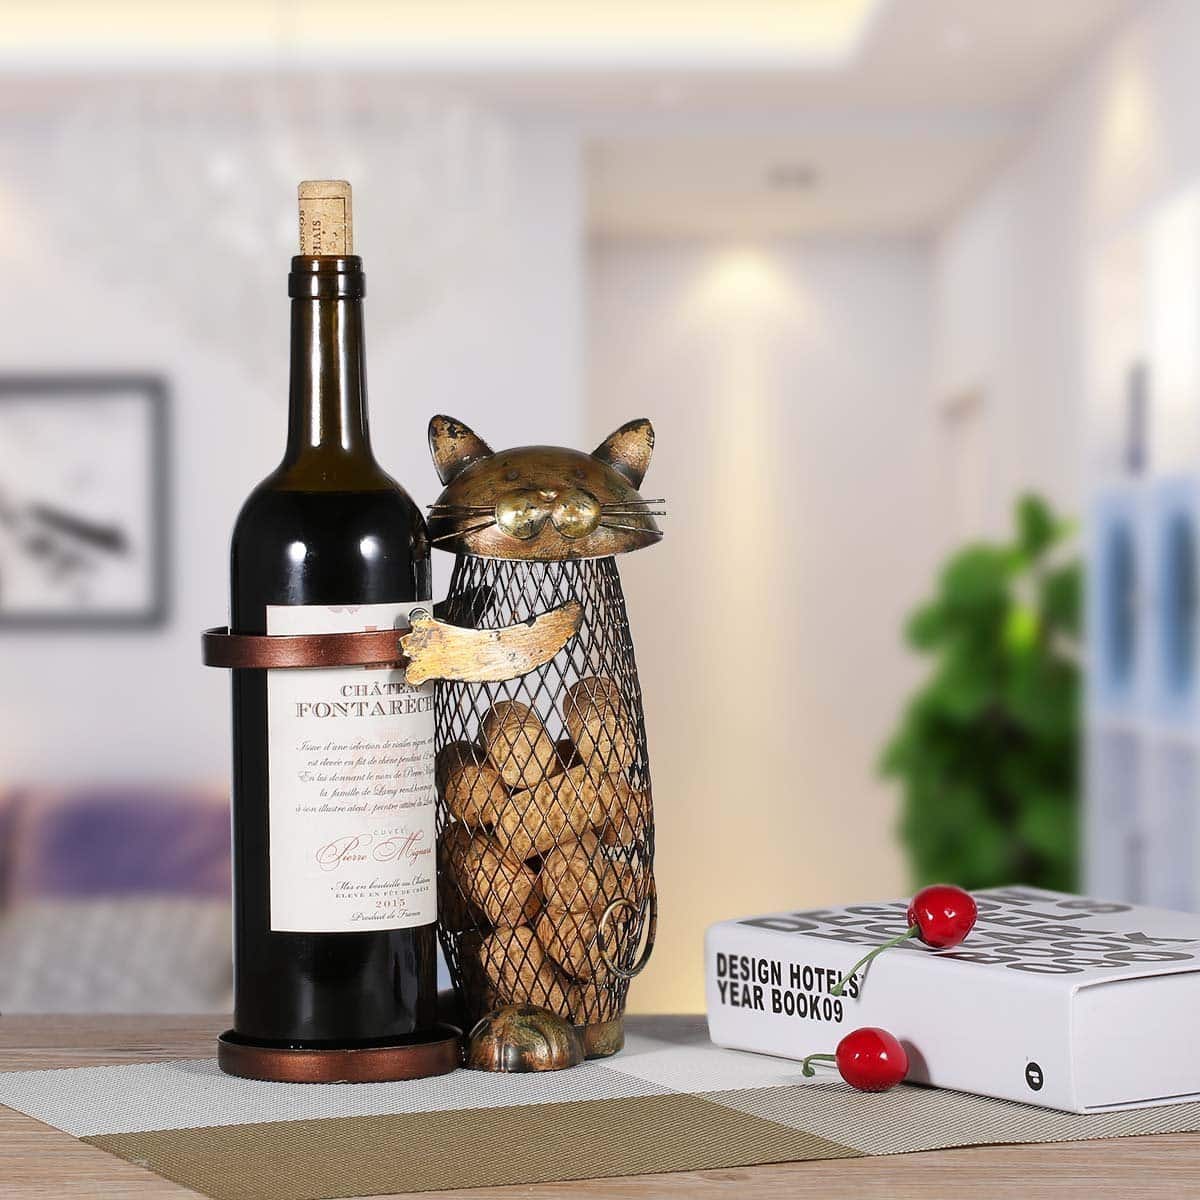 A beautiful cat decoration for your home, this cat wine bottle holder and cork cage are made from dark gold plated iron.